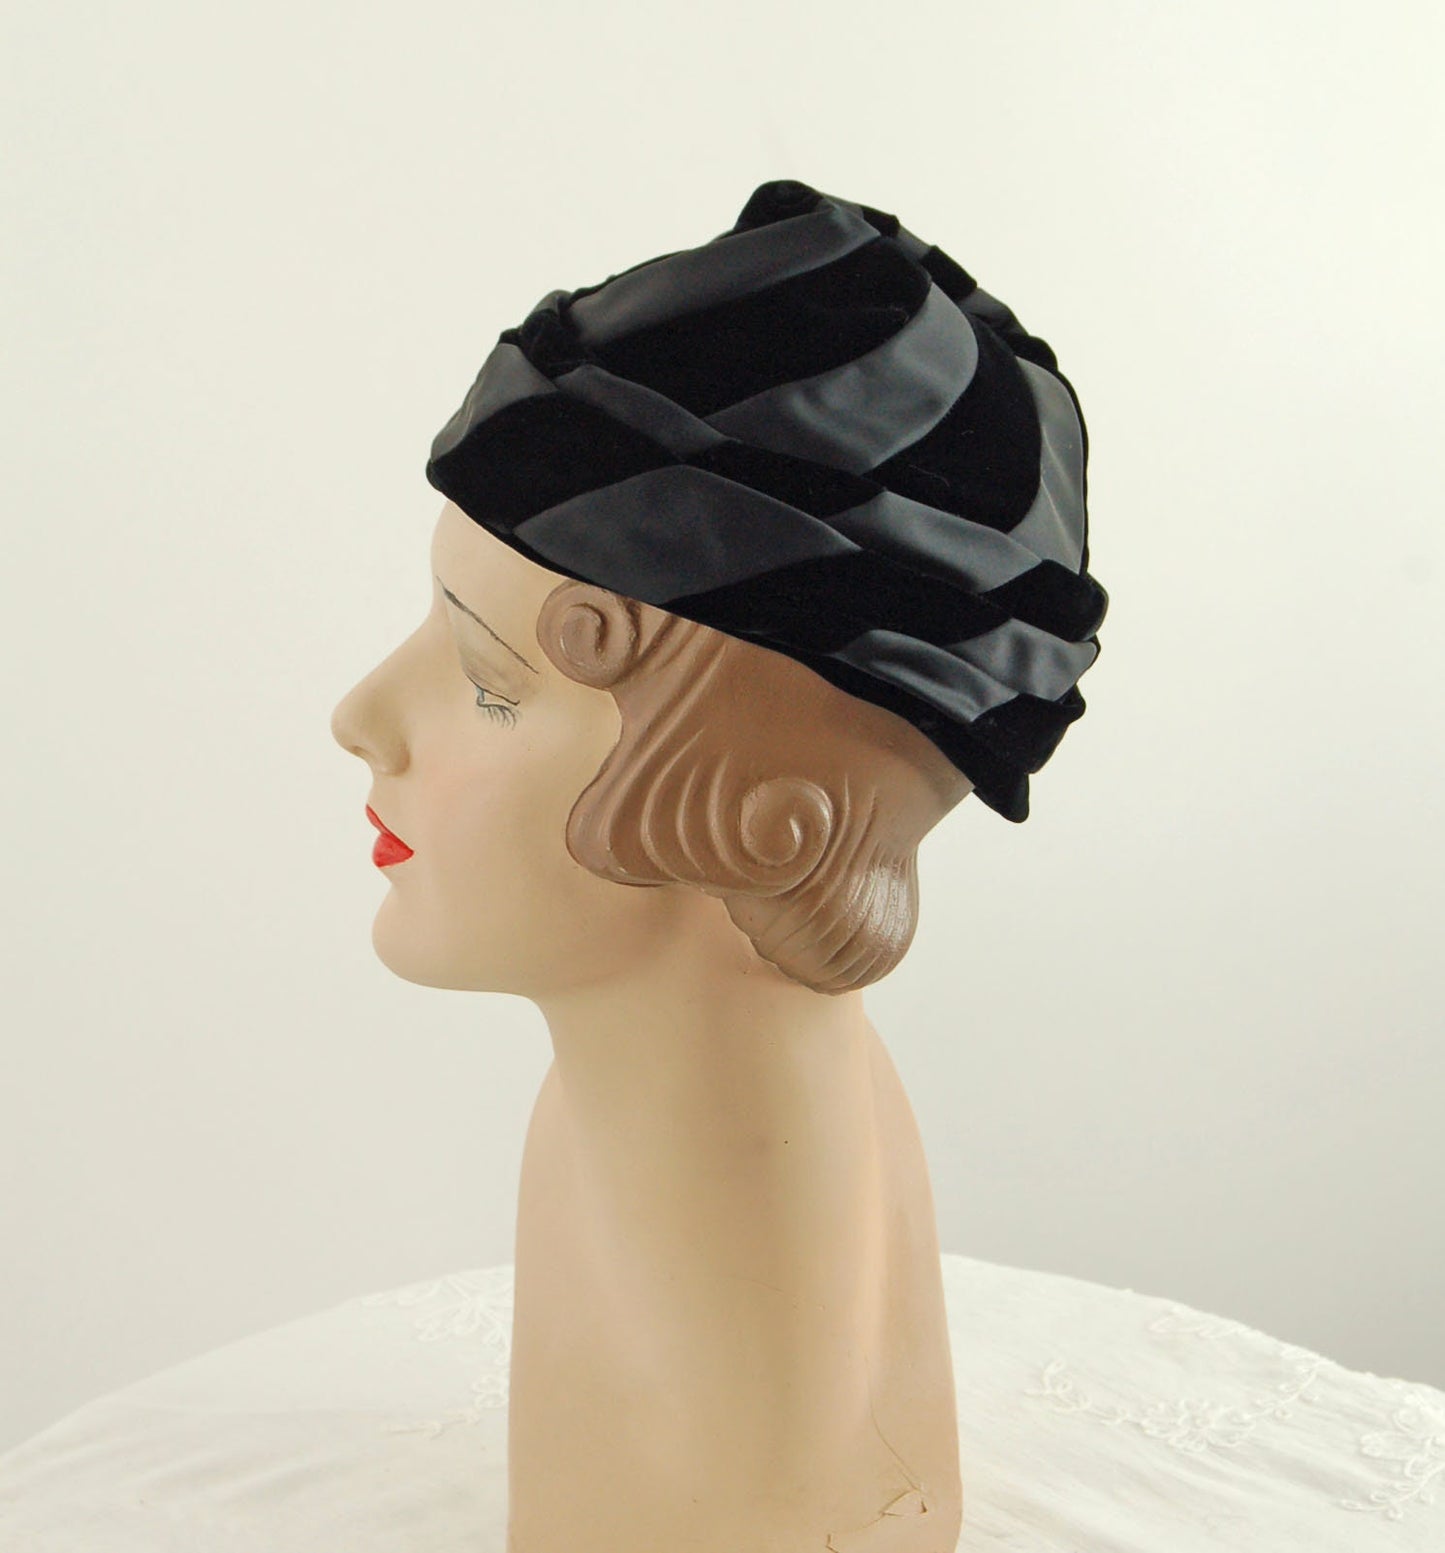 1960s hat turban style peaked hat black striped velvet satin Size 21  by Amy New York